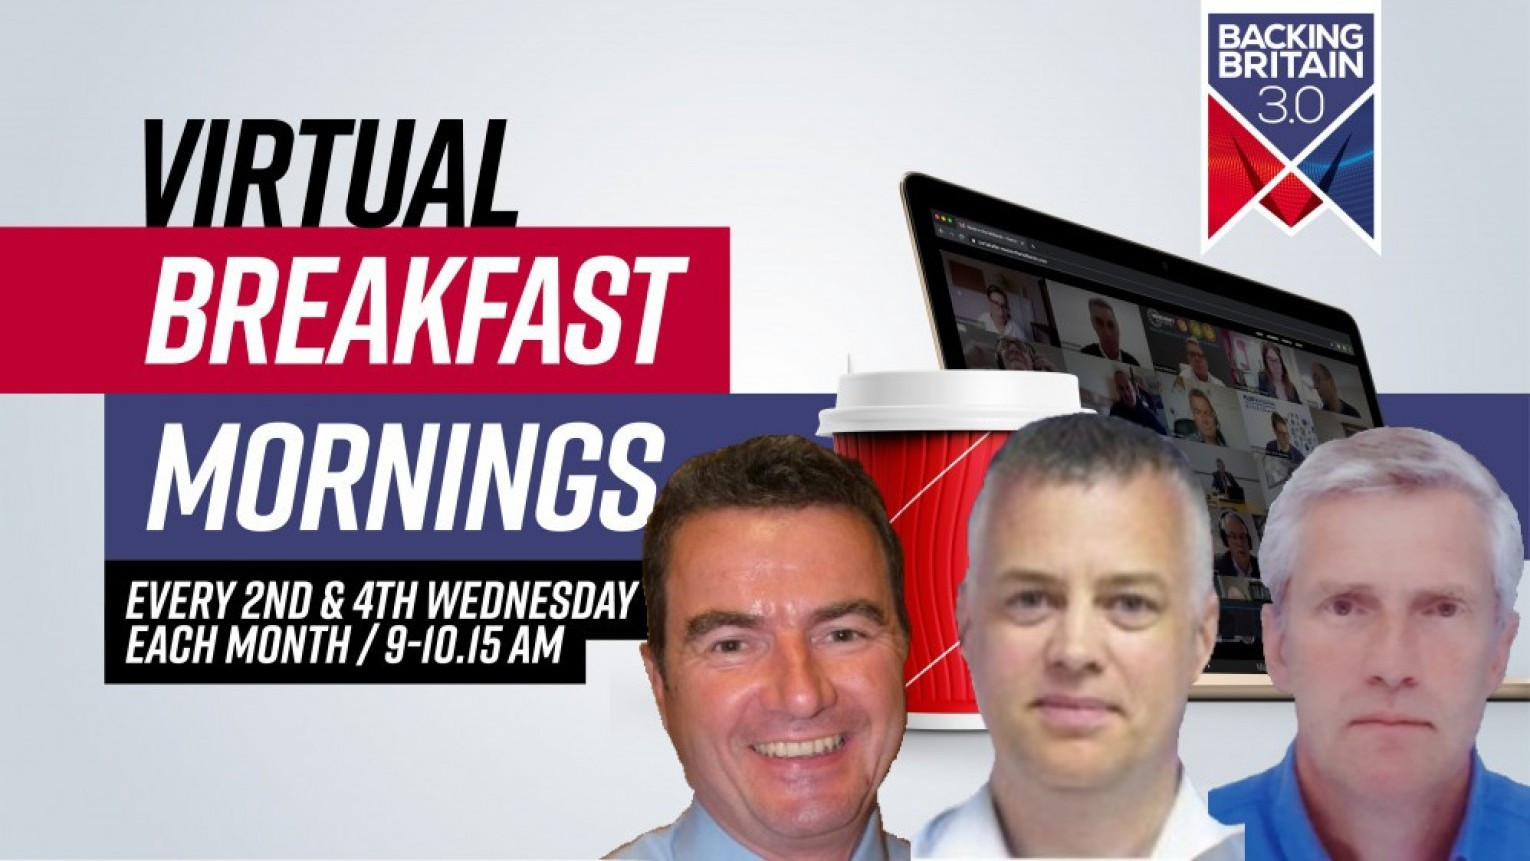 Backing Britain Virtual Breakfast Morning with Unison, SGS and MTC